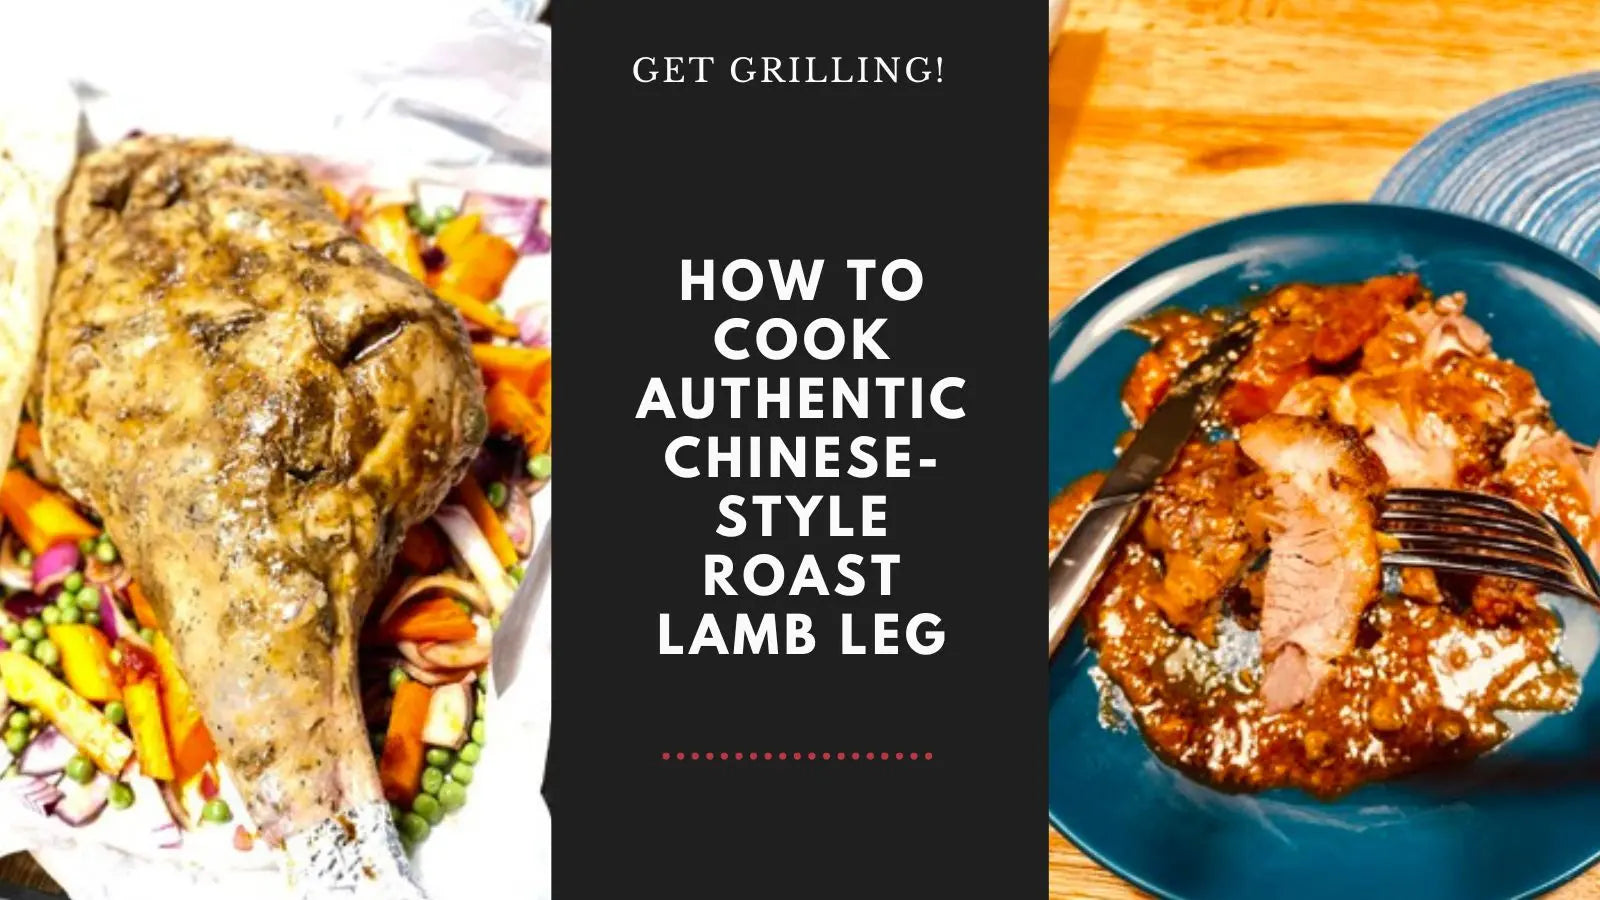 How to Cook Authentic Chinese-Style Roast Lamb Leg With wireless meat thermometer